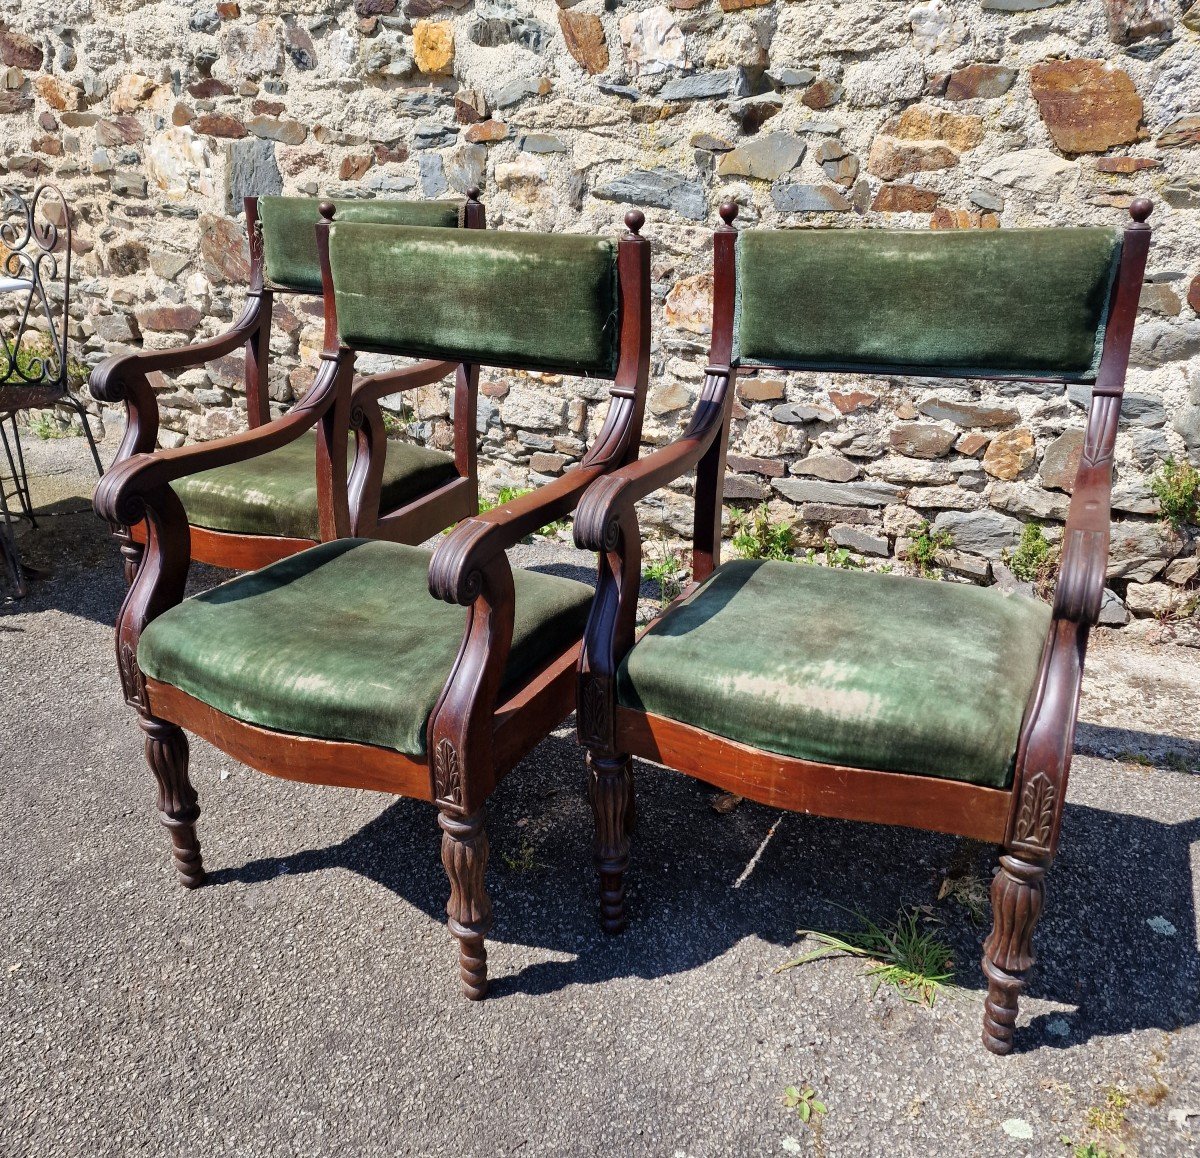 Series Of 3 Restoration Period Armchairs In Empire Mahogany To Restore-photo-2